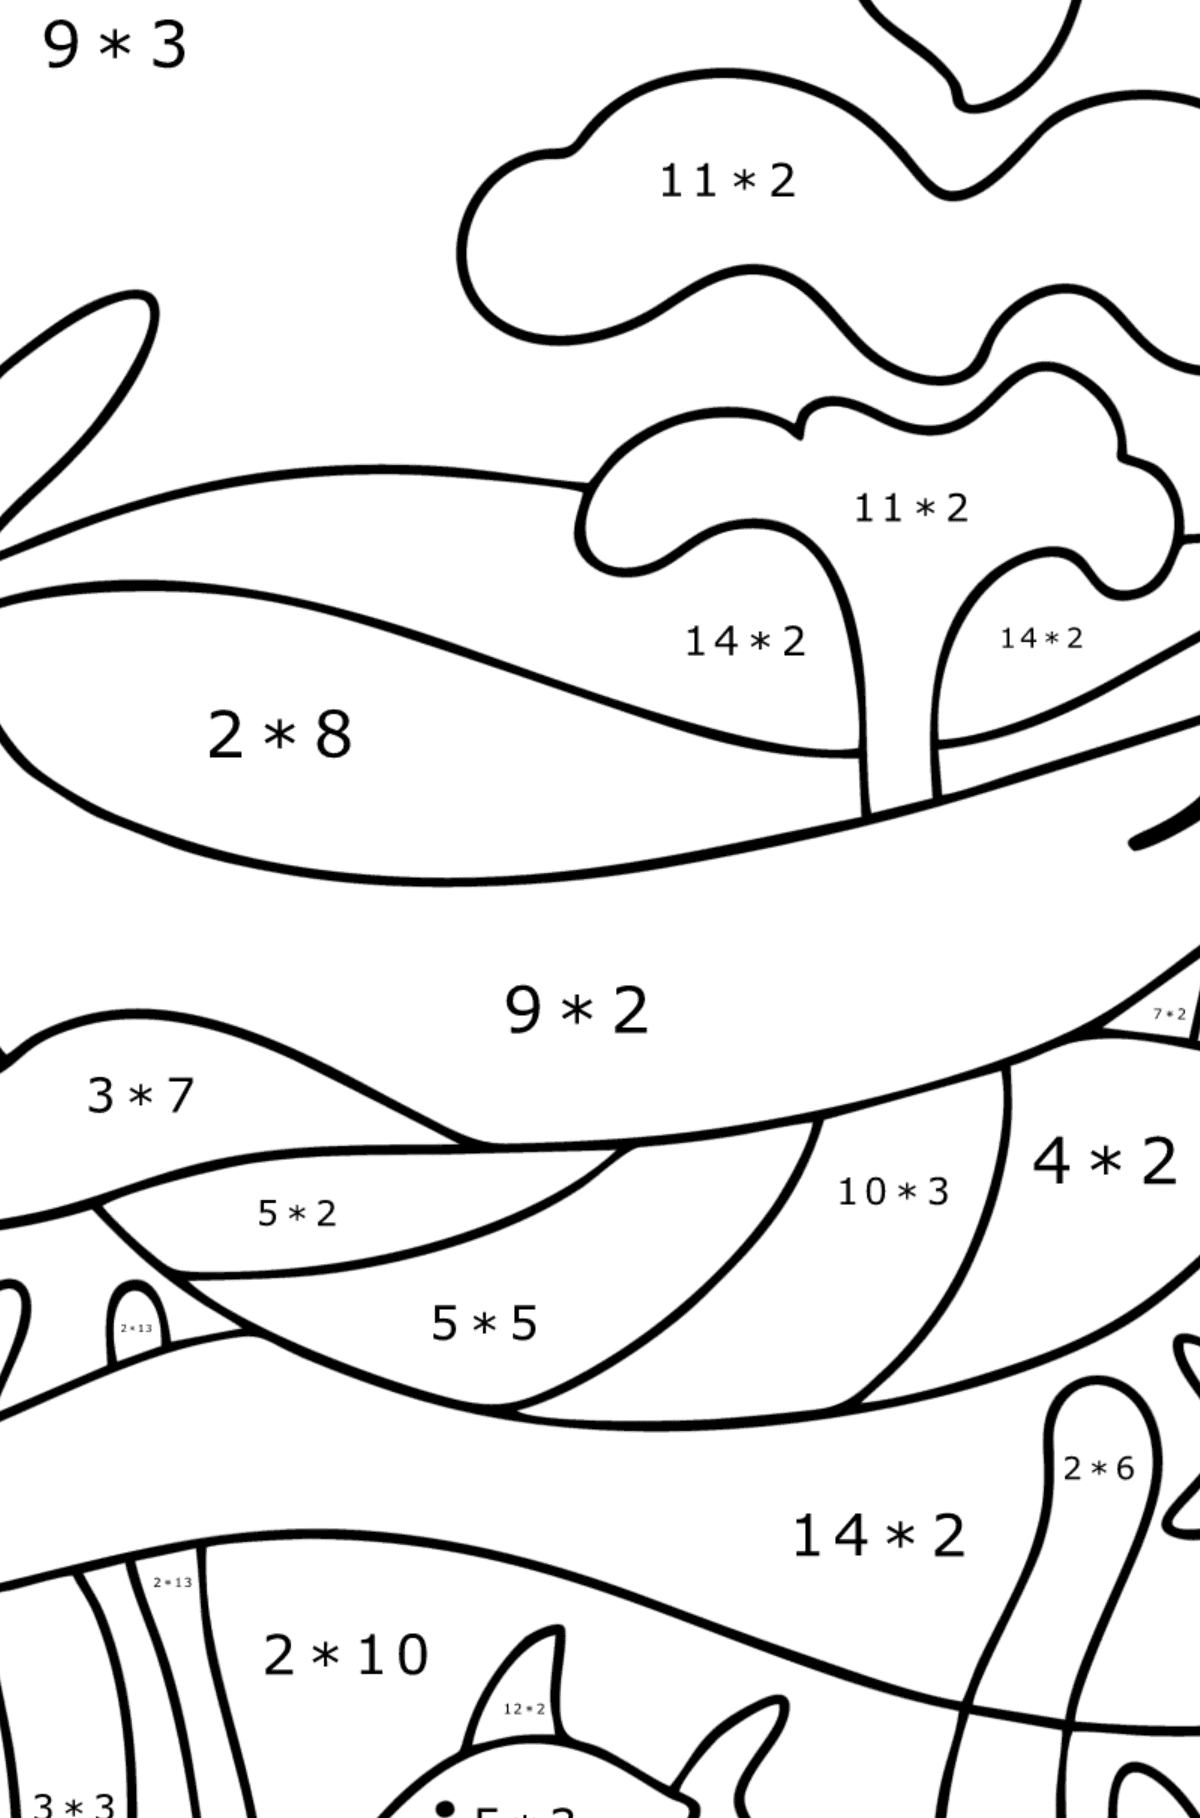 Cute sperm whale coloring page - Math Coloring - Multiplication for Kids